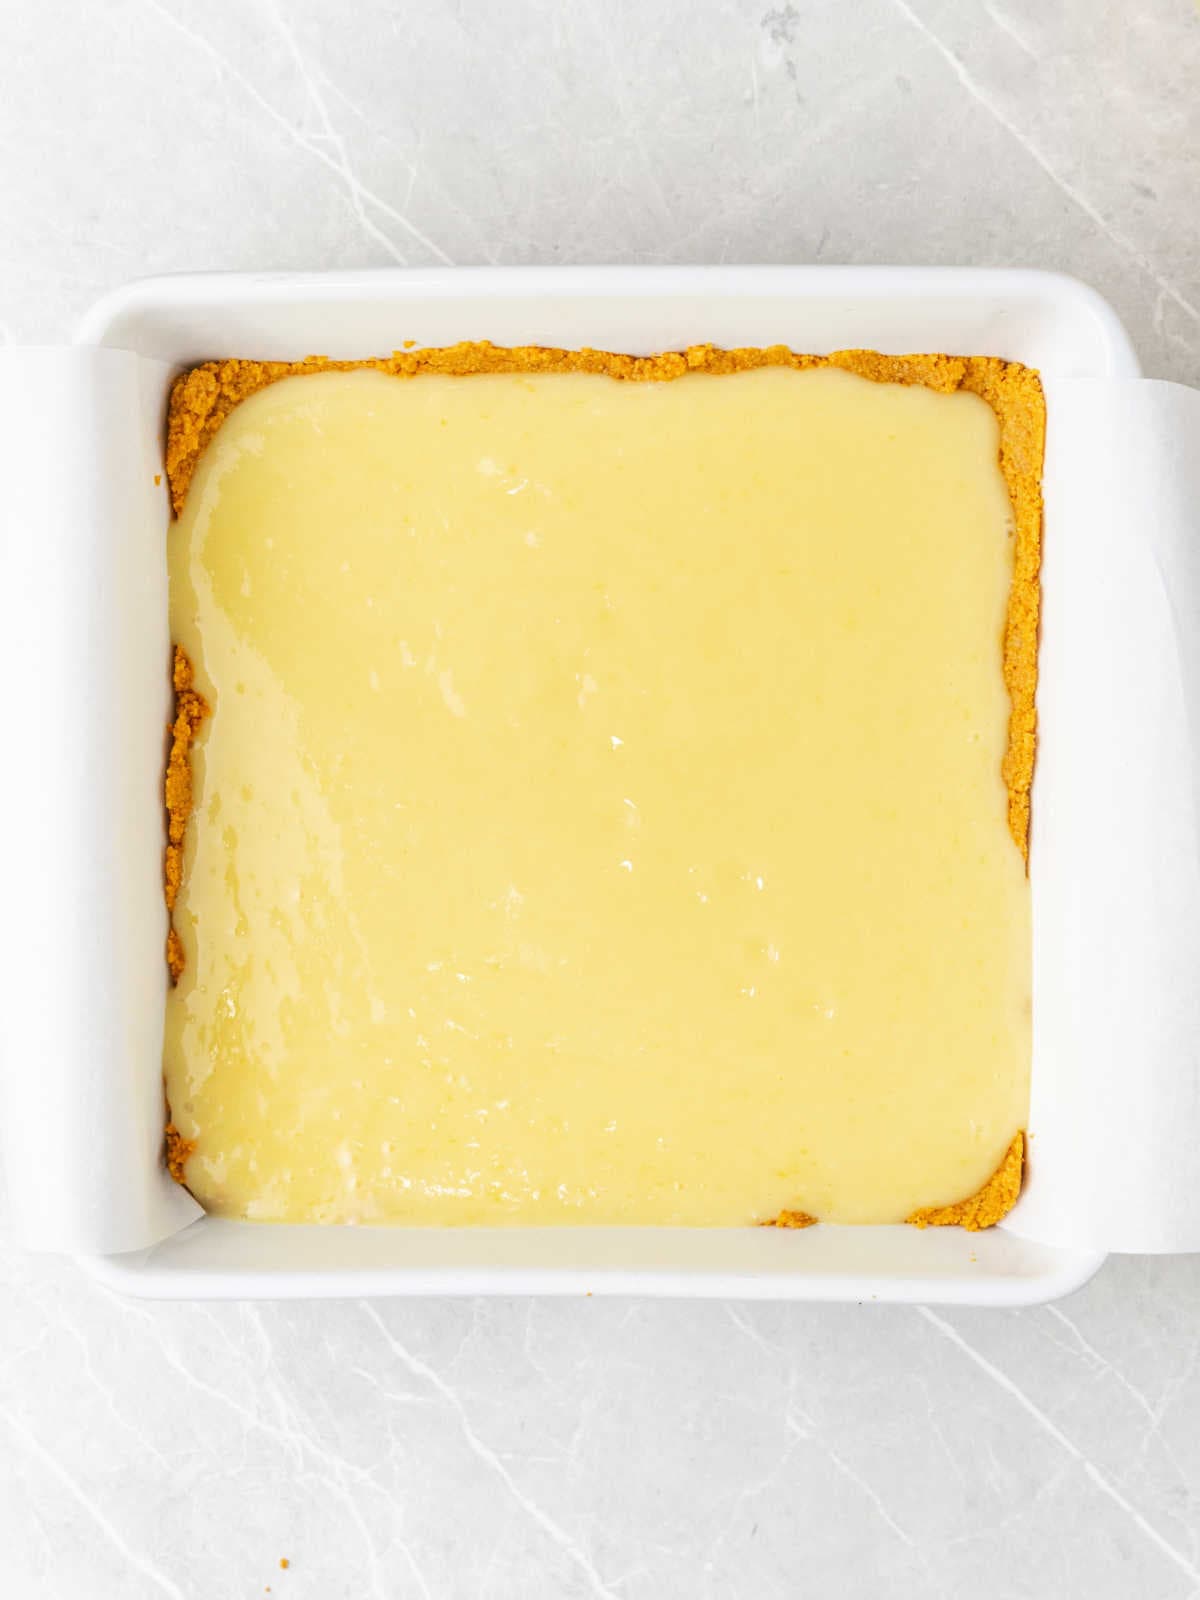 Unbaked lemon bars in a white pan with parchment paper. Light gray surface.